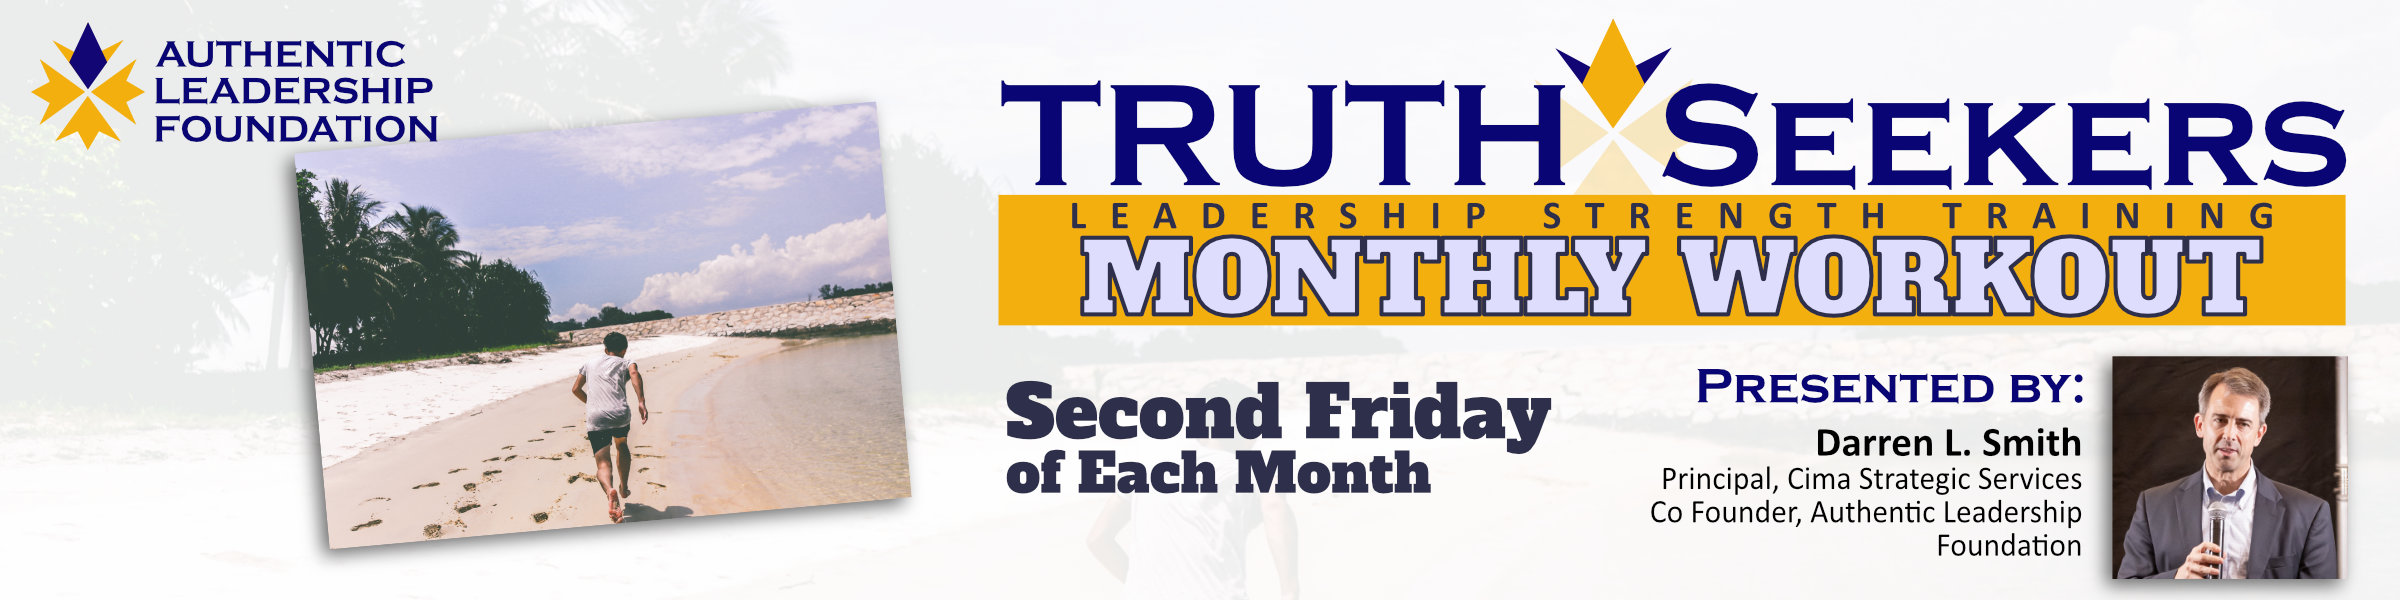 Truth Seekers Leadership Training Monthly Workout